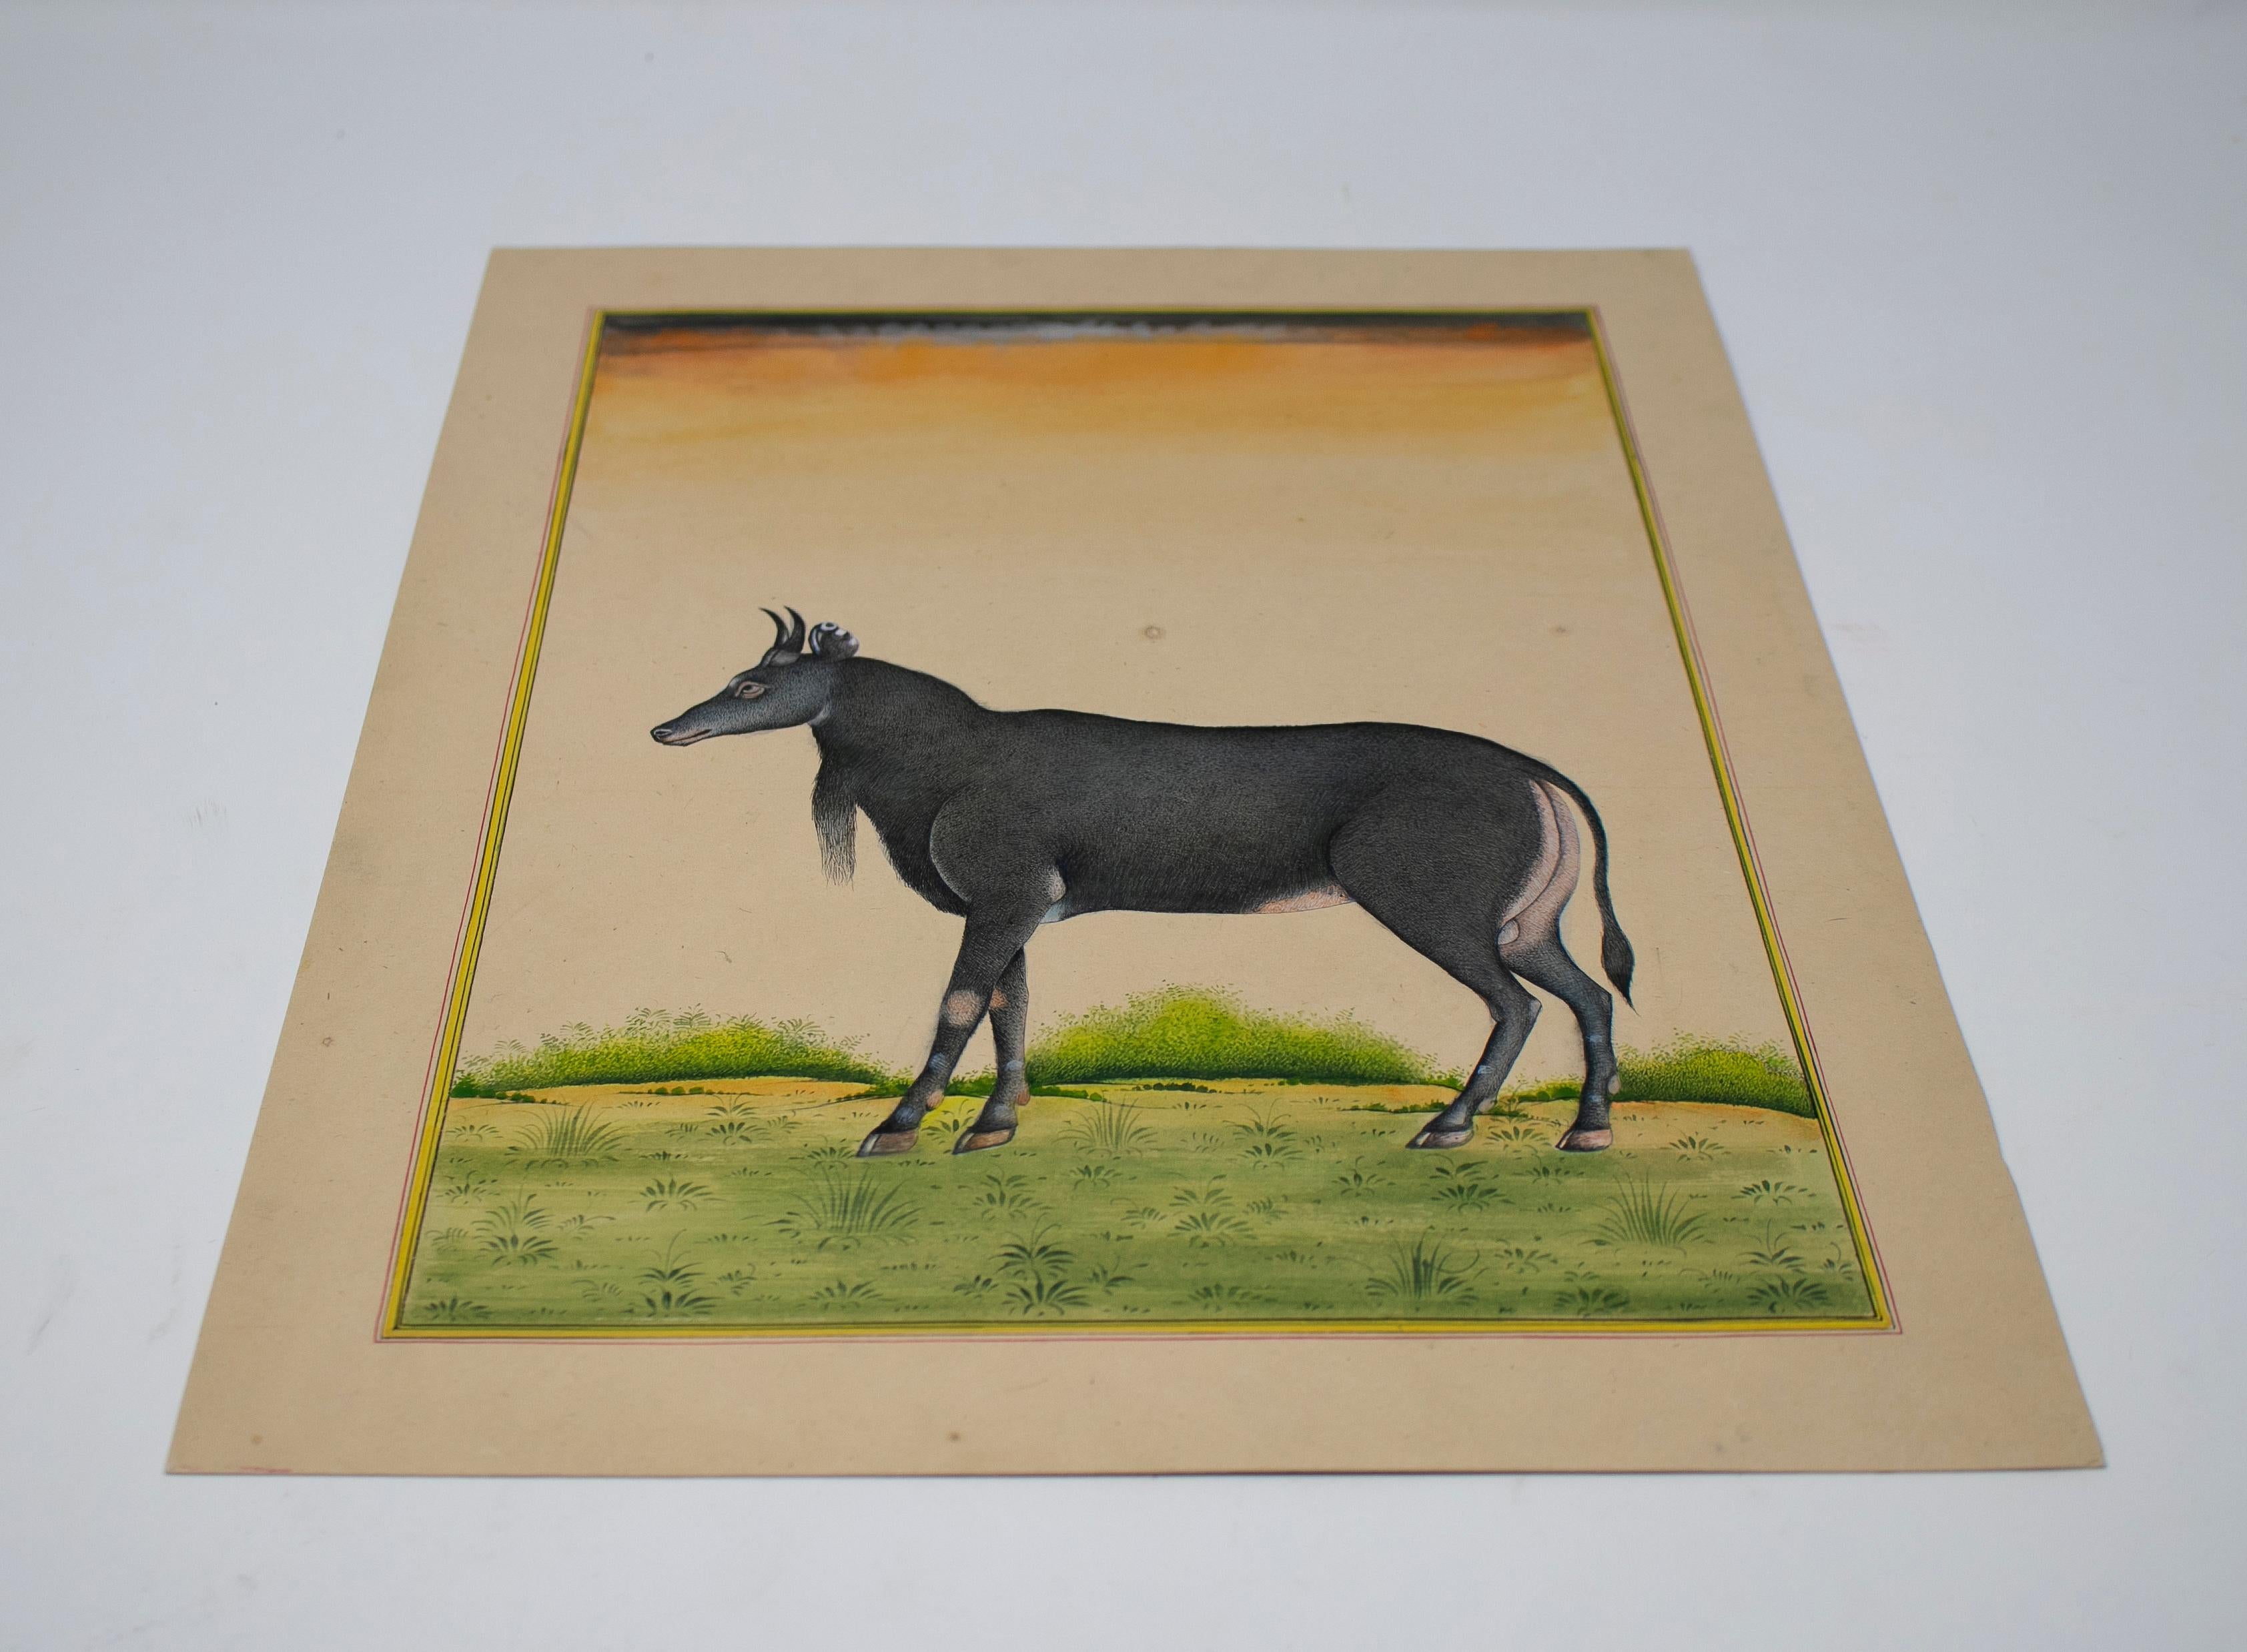 1970s Indian paper drawing of a goat, part of a large private collection.

Dimensions with frame: 35 x 26 cm.